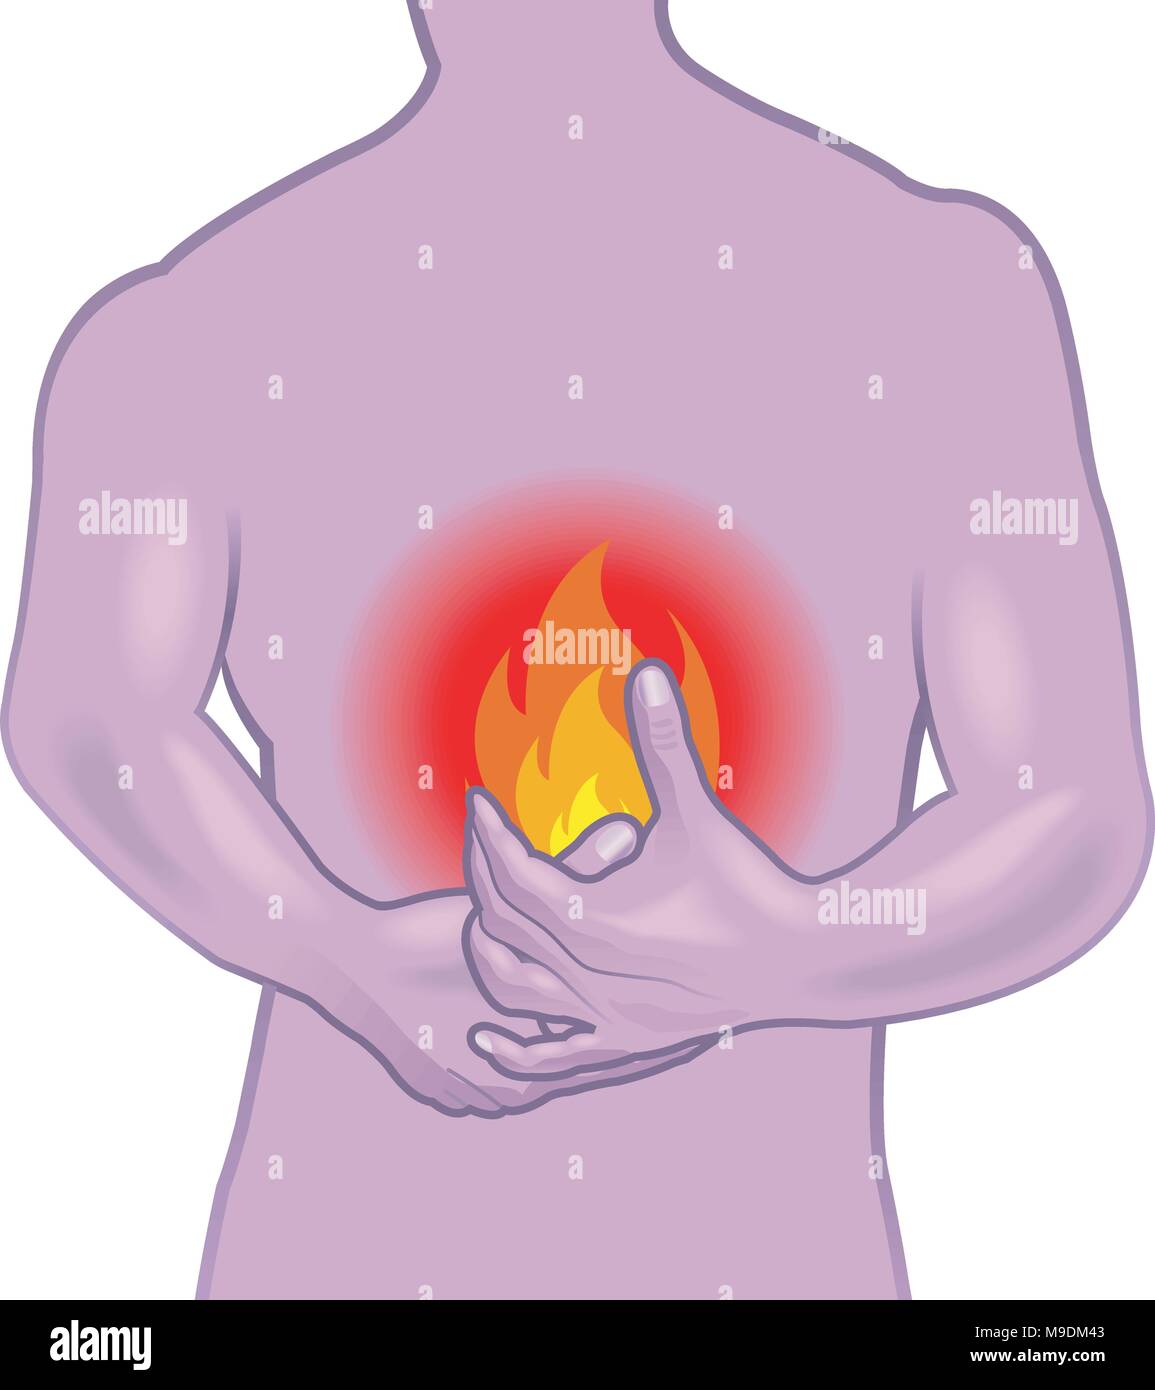 symbolic medical illustration showing the symptoms of the burning stomach Stock Vector